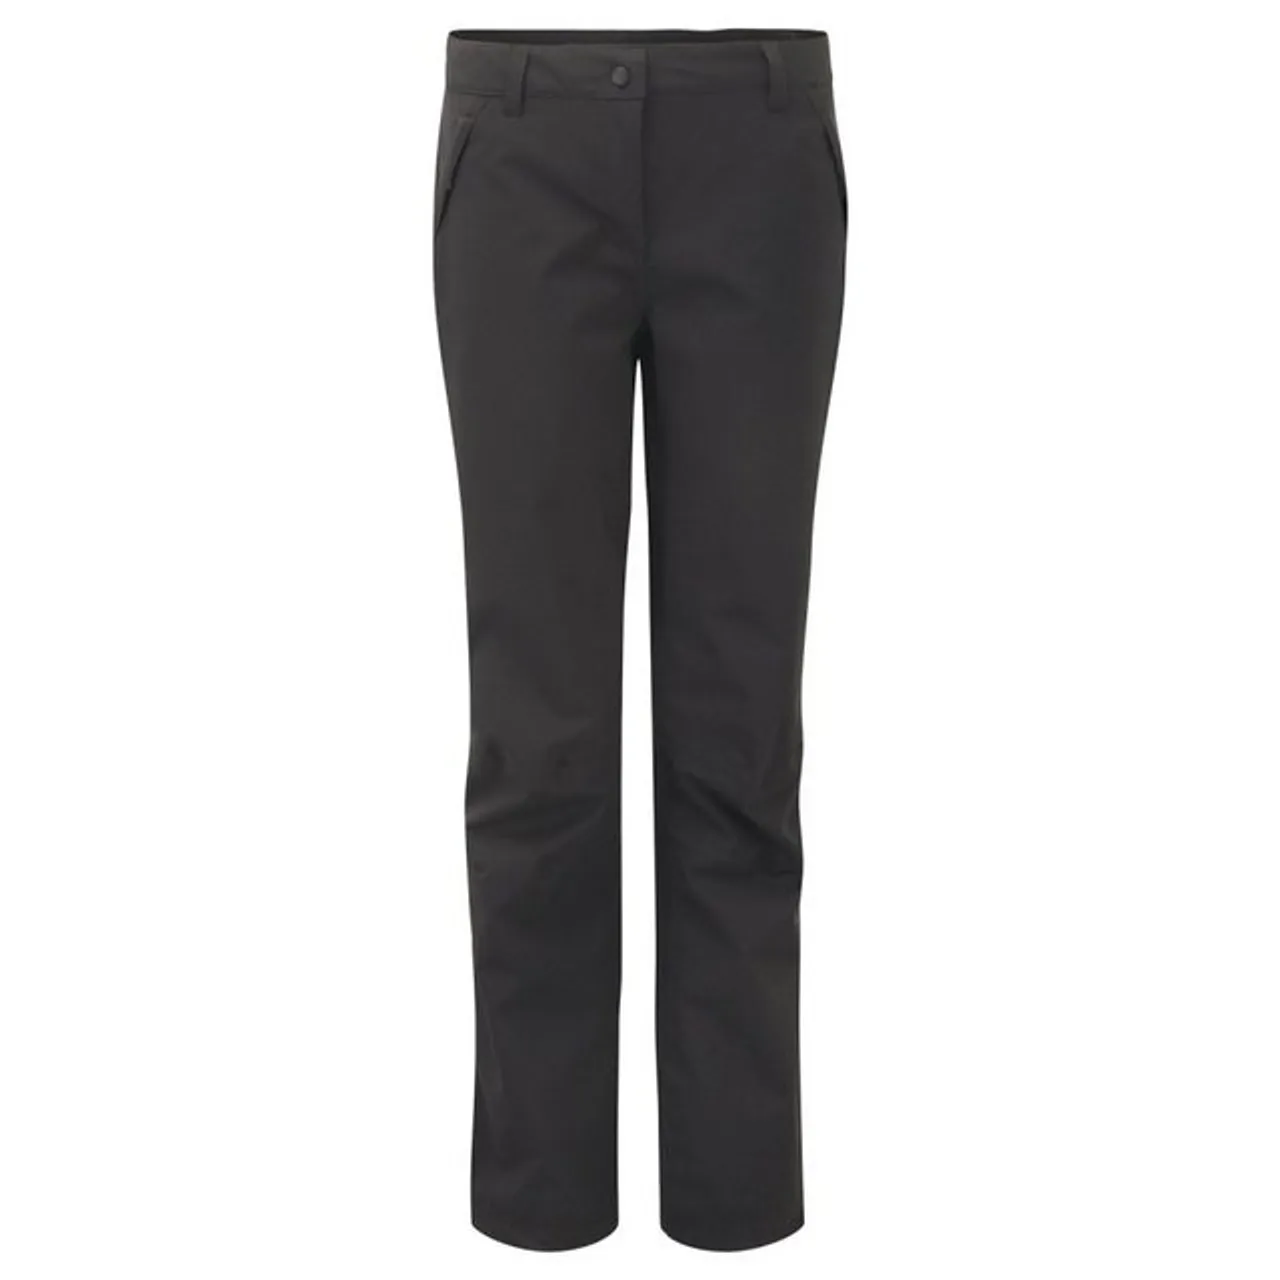 Craghoppers Outdoorhose Aysgarth Thermo Waterproof Trousers